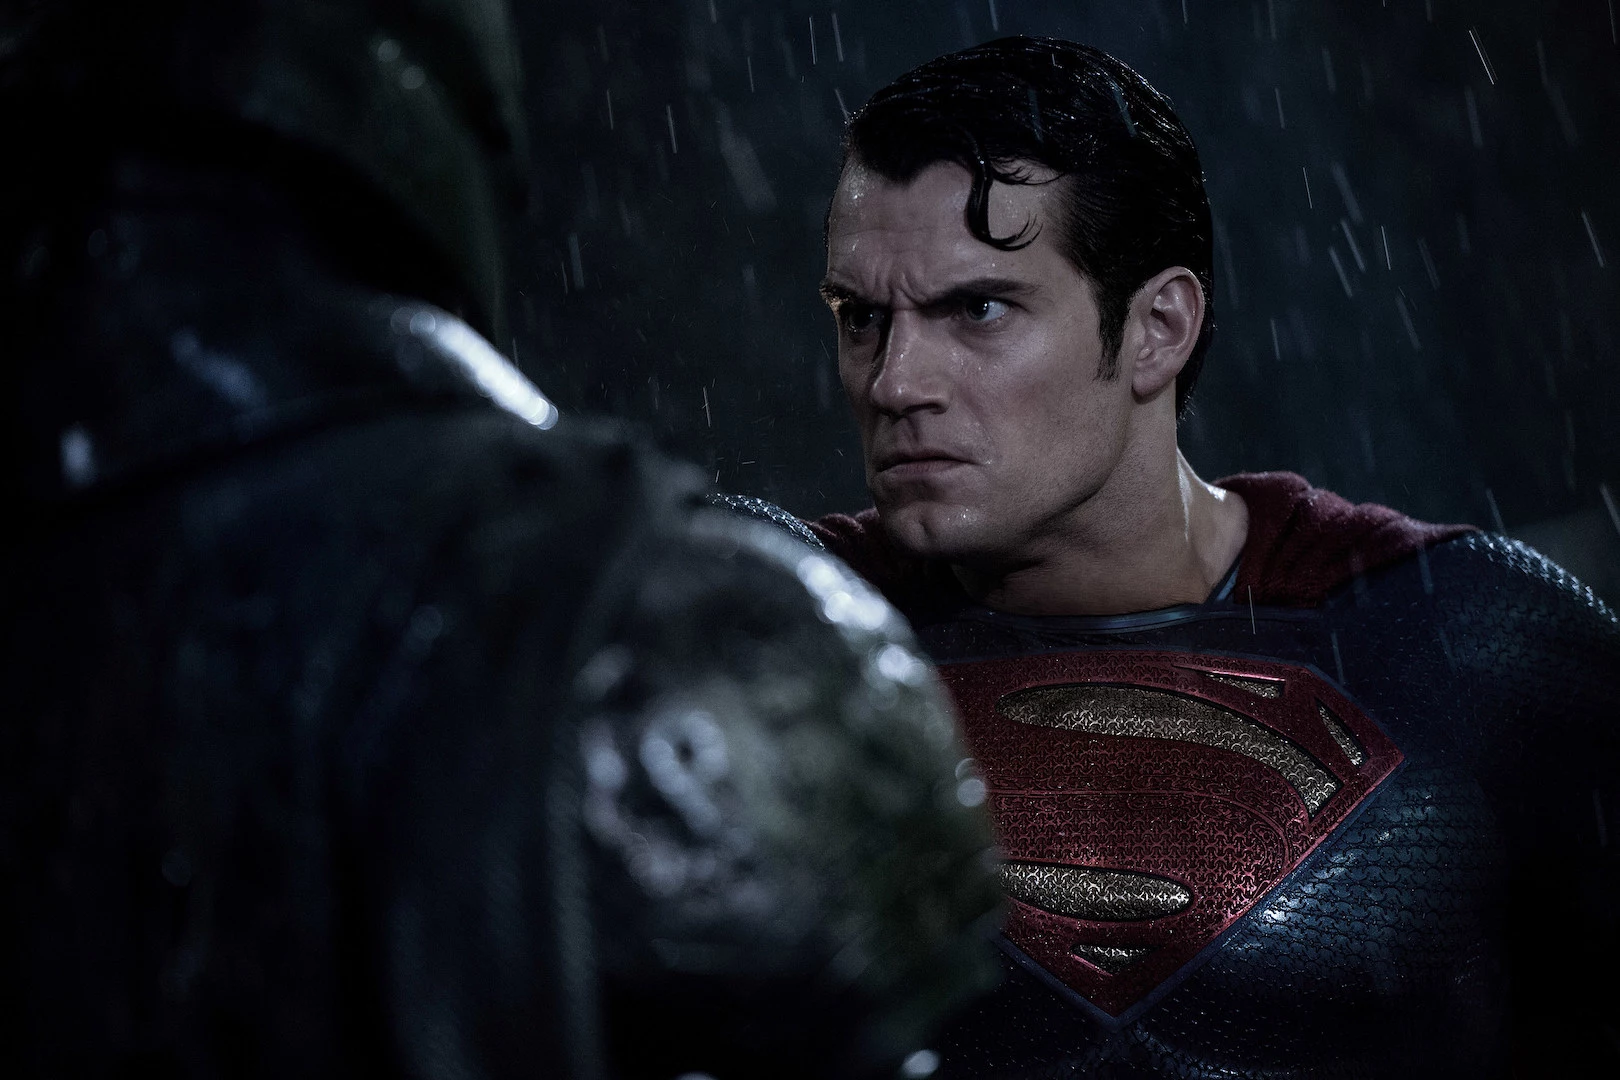 Henry Cavill may return as Superman but not in the superhero's own movie, News & Features